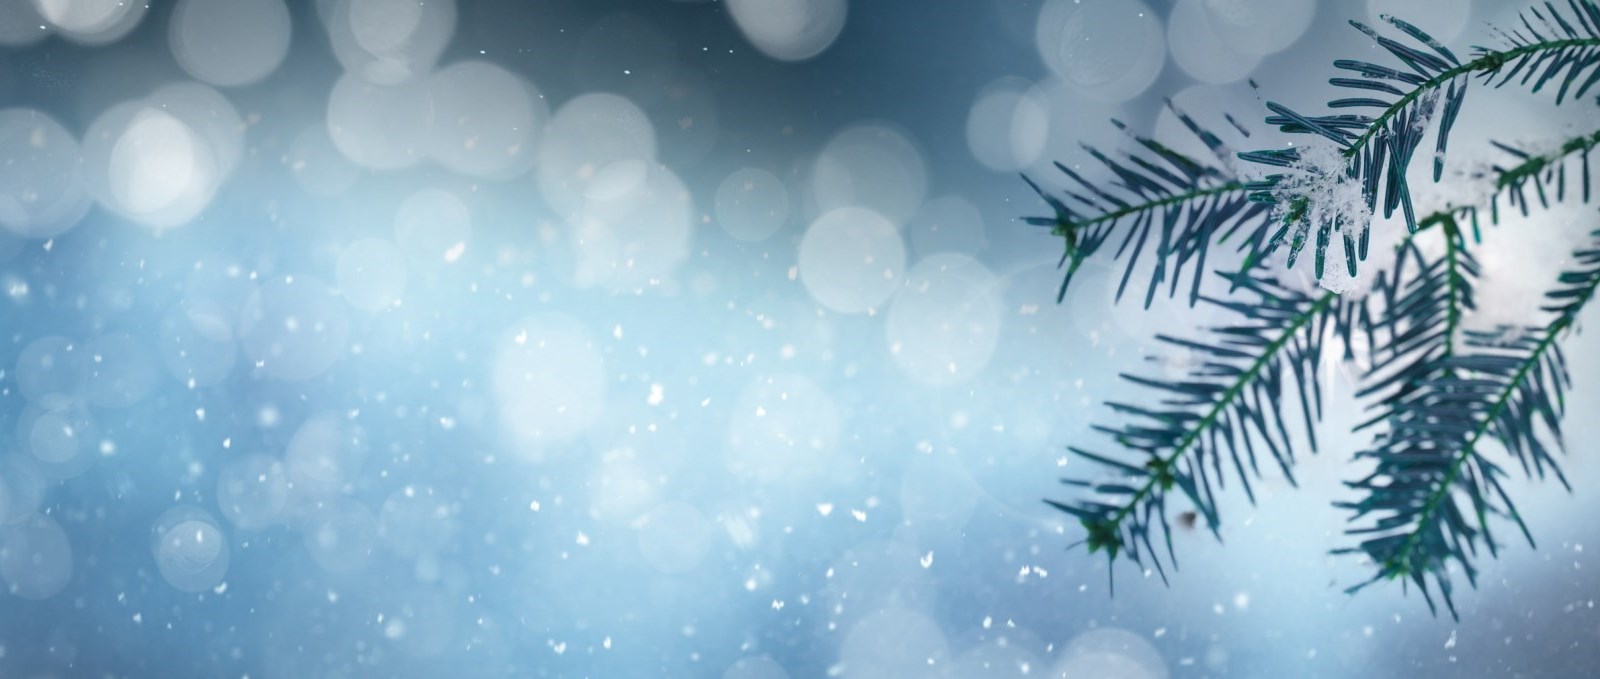 Blue blurry winter background with bokeh lights and fir branch stock photo